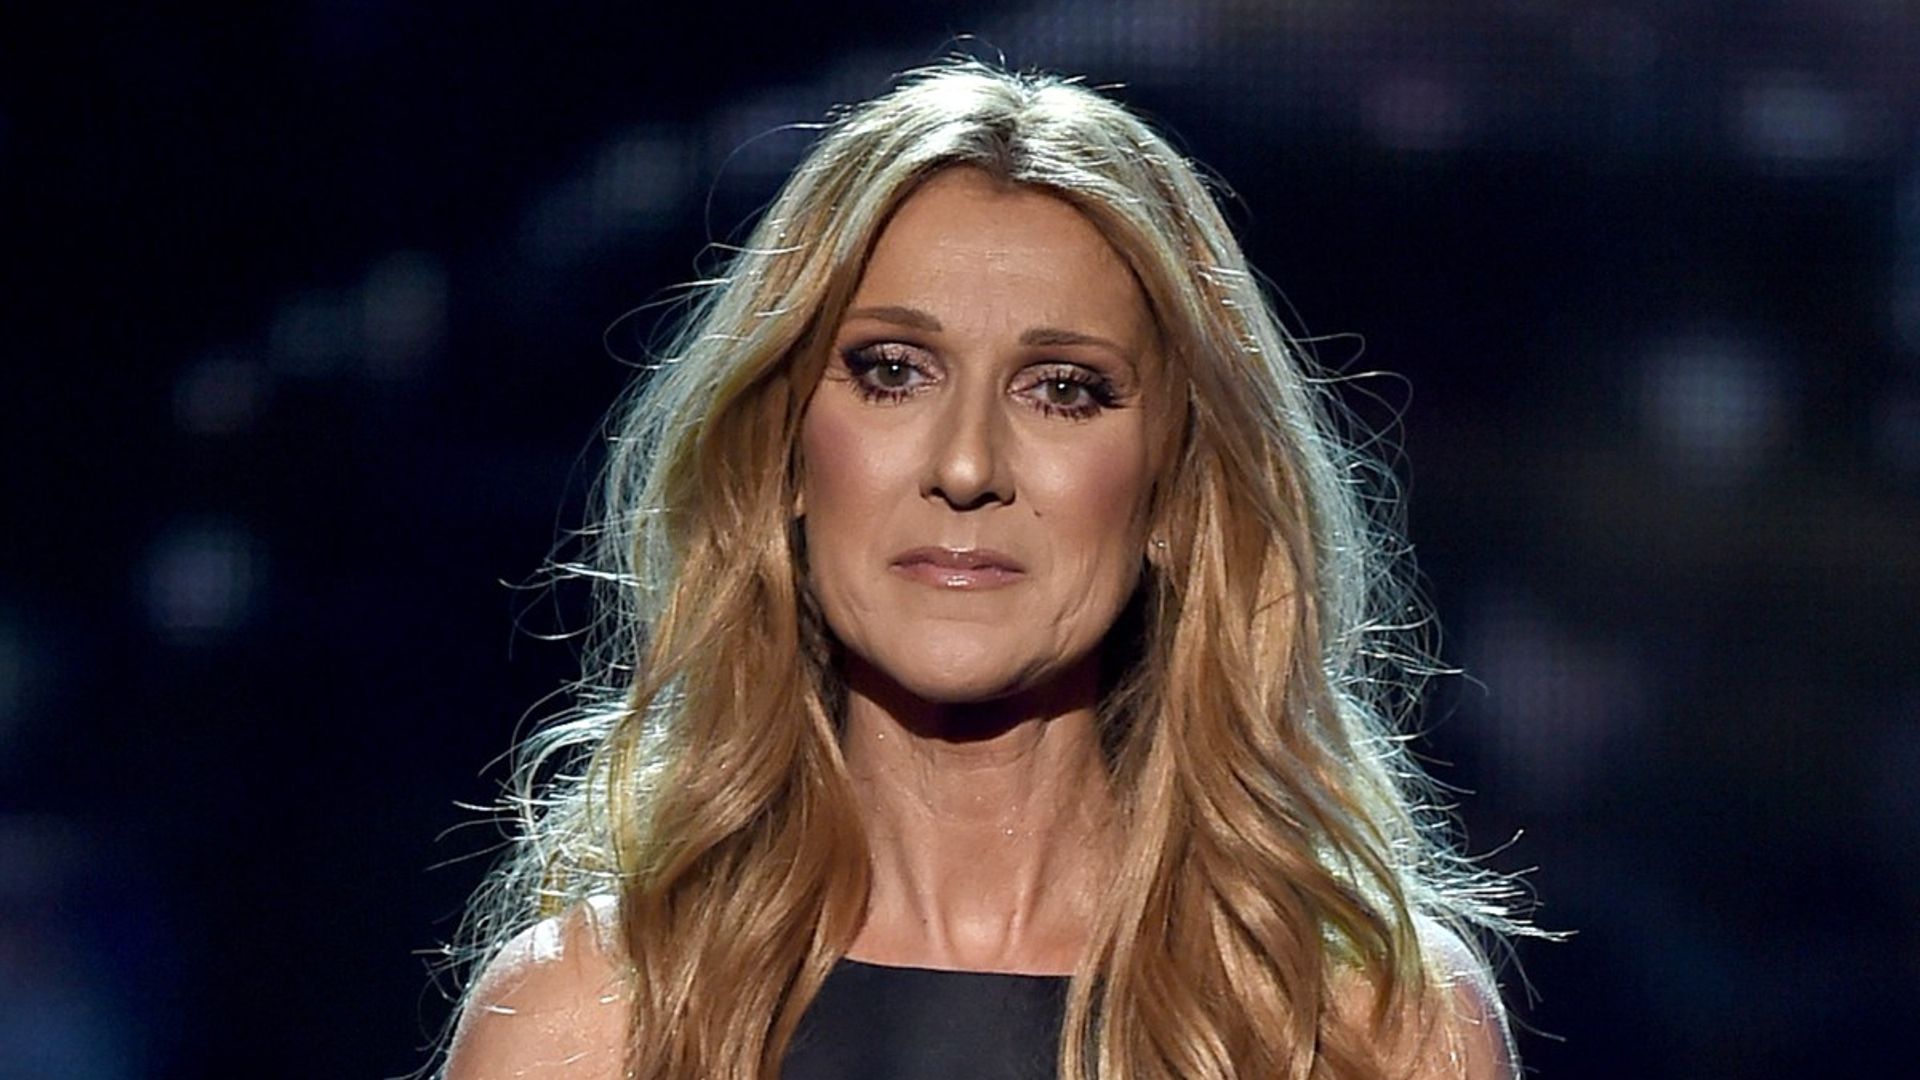 Celine Dion on verge of tears while sharing update on health difficulties